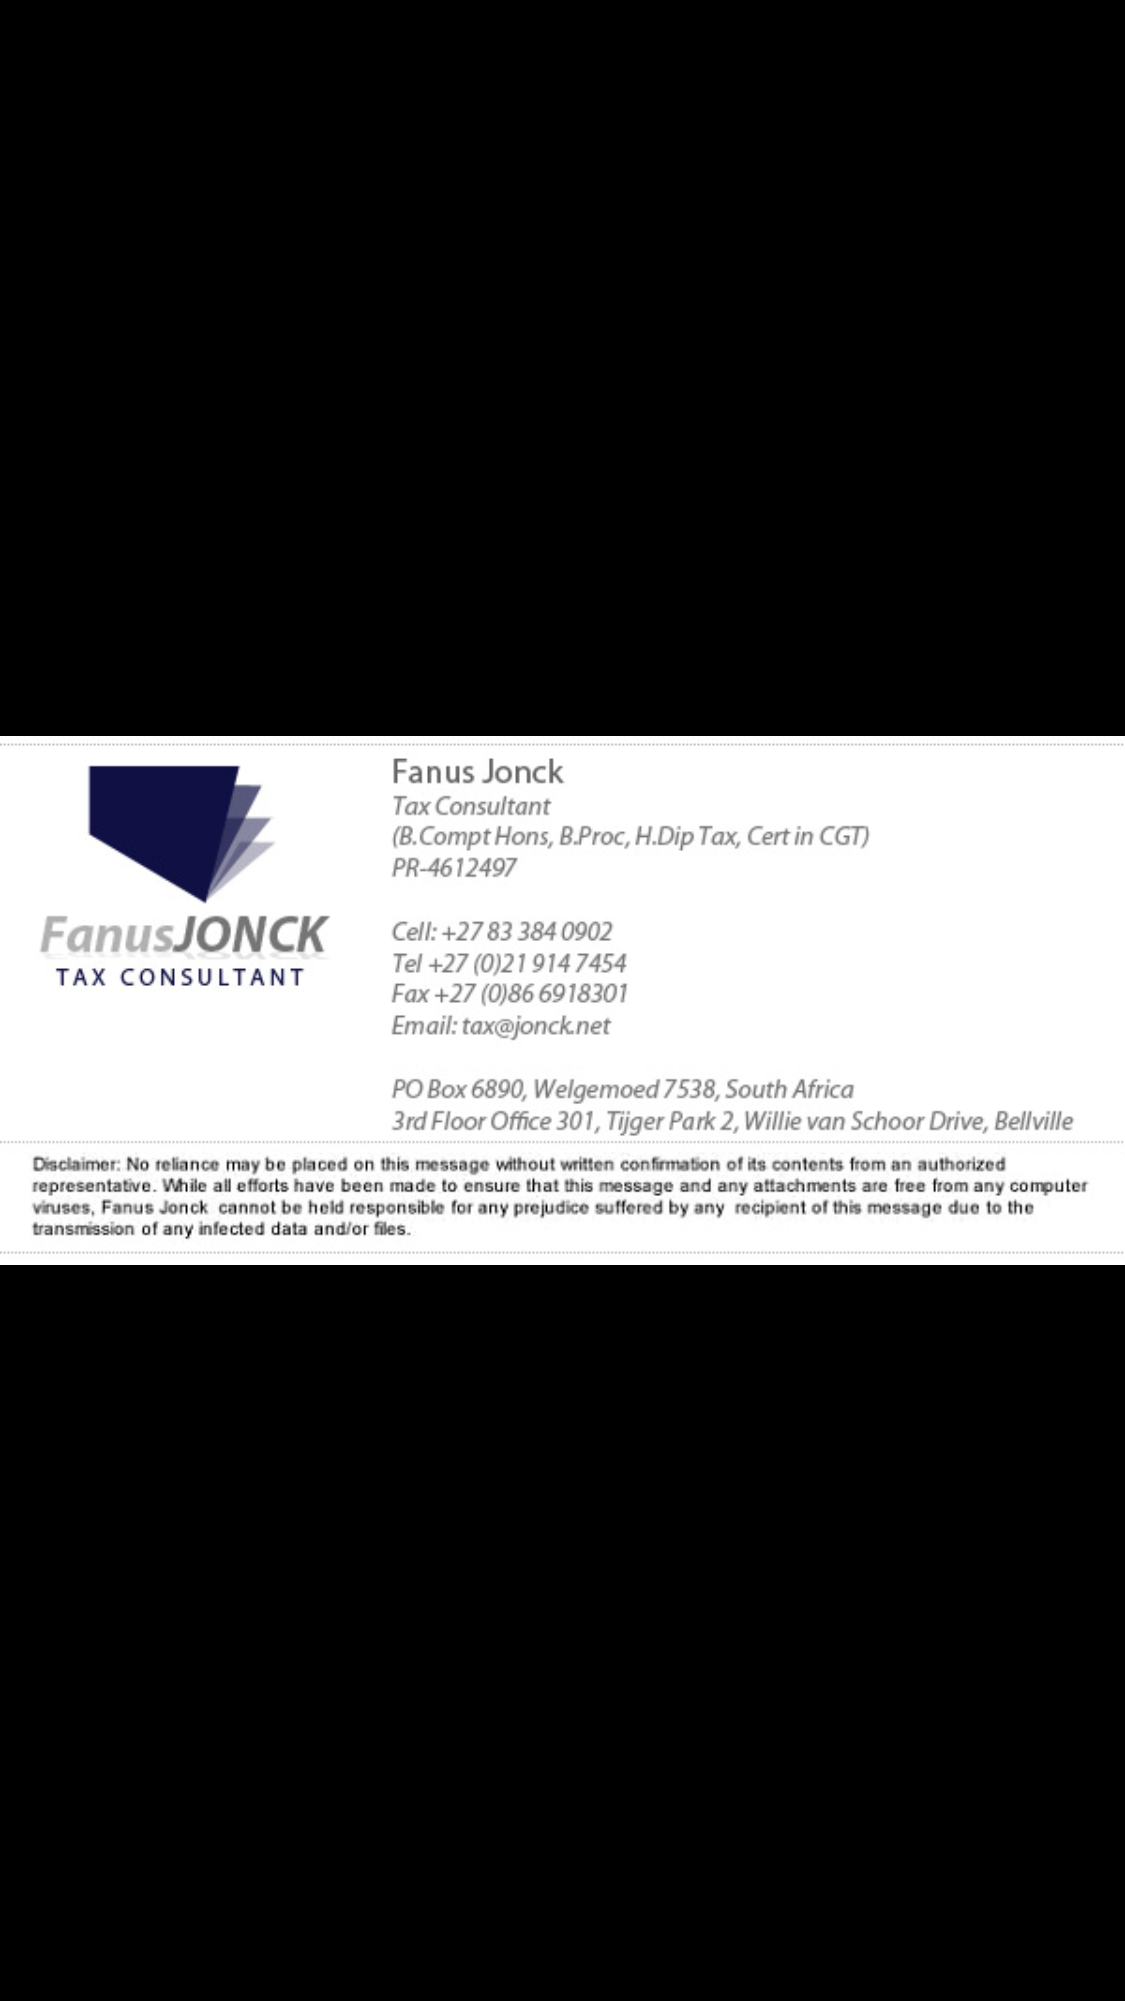 Fanus Jonck is exceptionally knowledgable when it comes to dealing with Foreign property transactions ... 
contact him with any queries ...
Tax@jonck.net
021 9147454
 
 